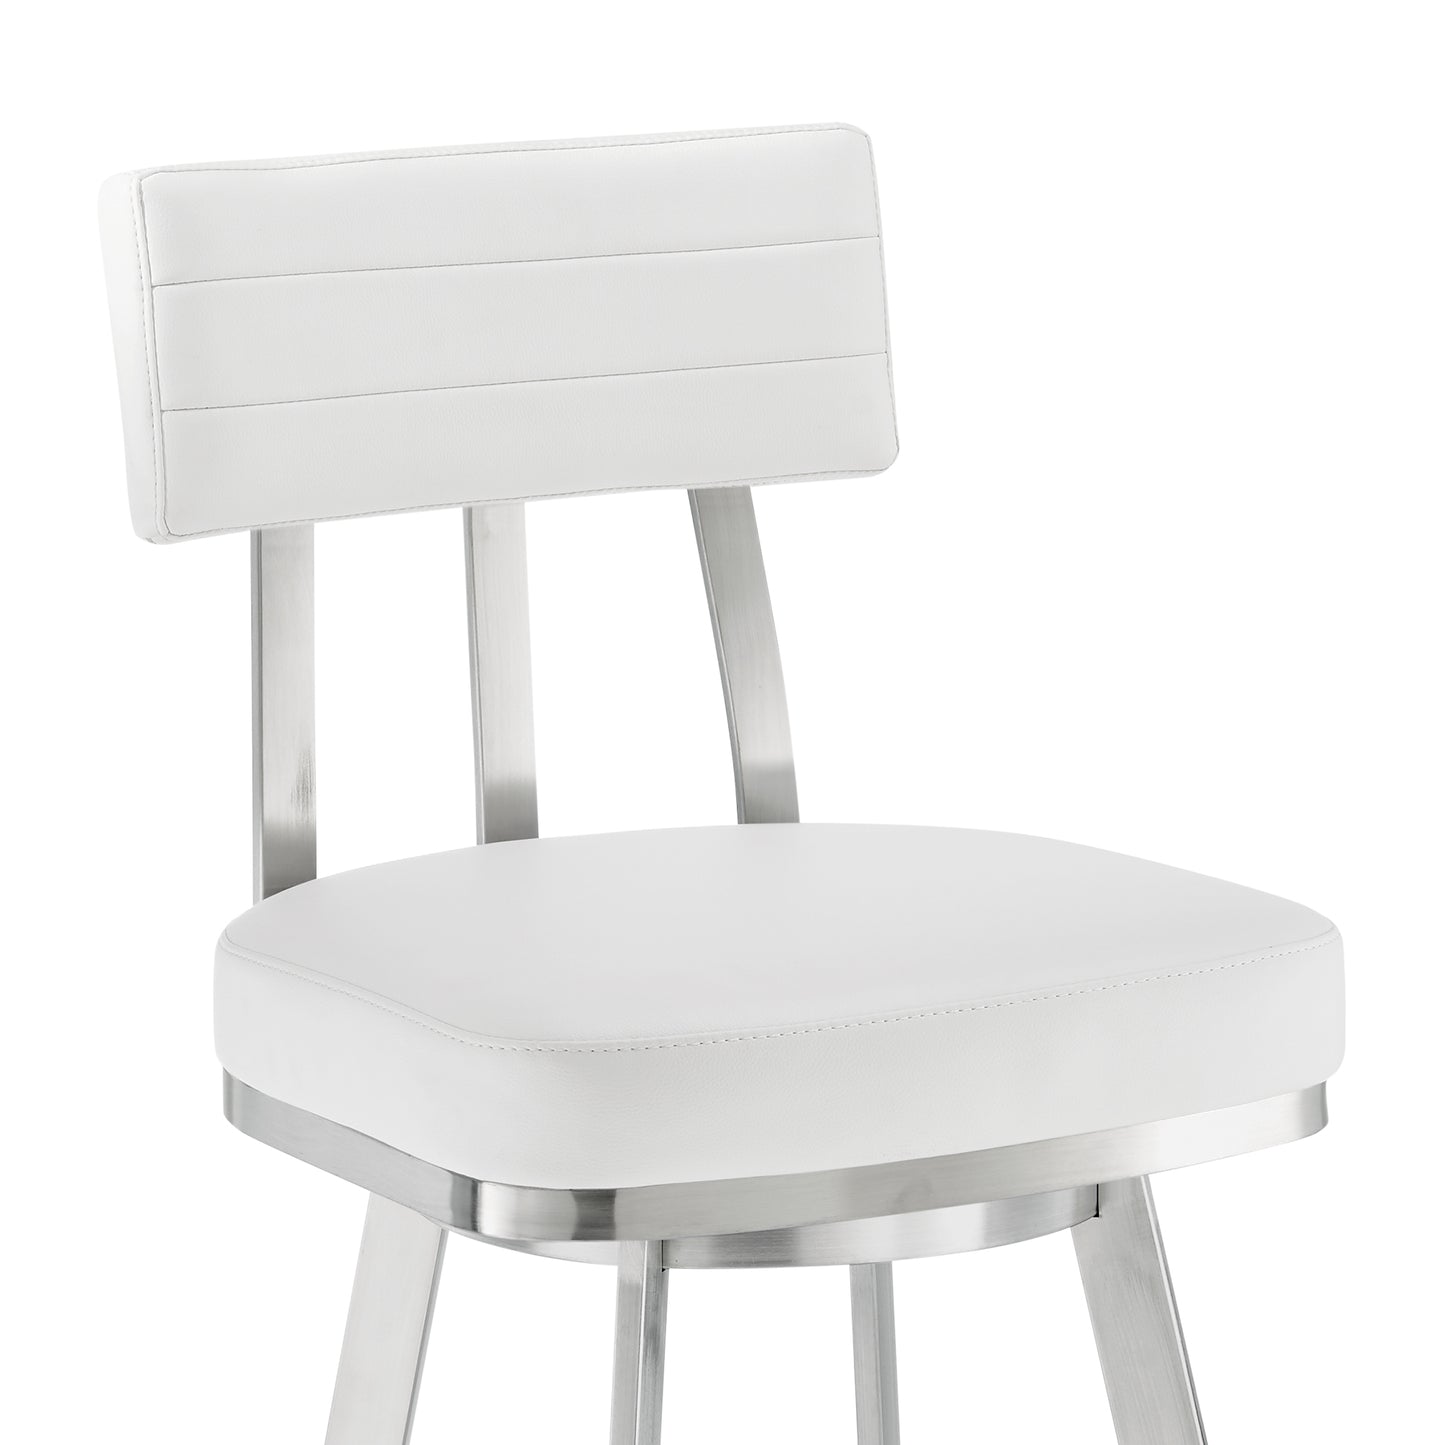 Benjamin 30" Swivel Bar Stool in Brushed Stainless Steel with White Faux Leather